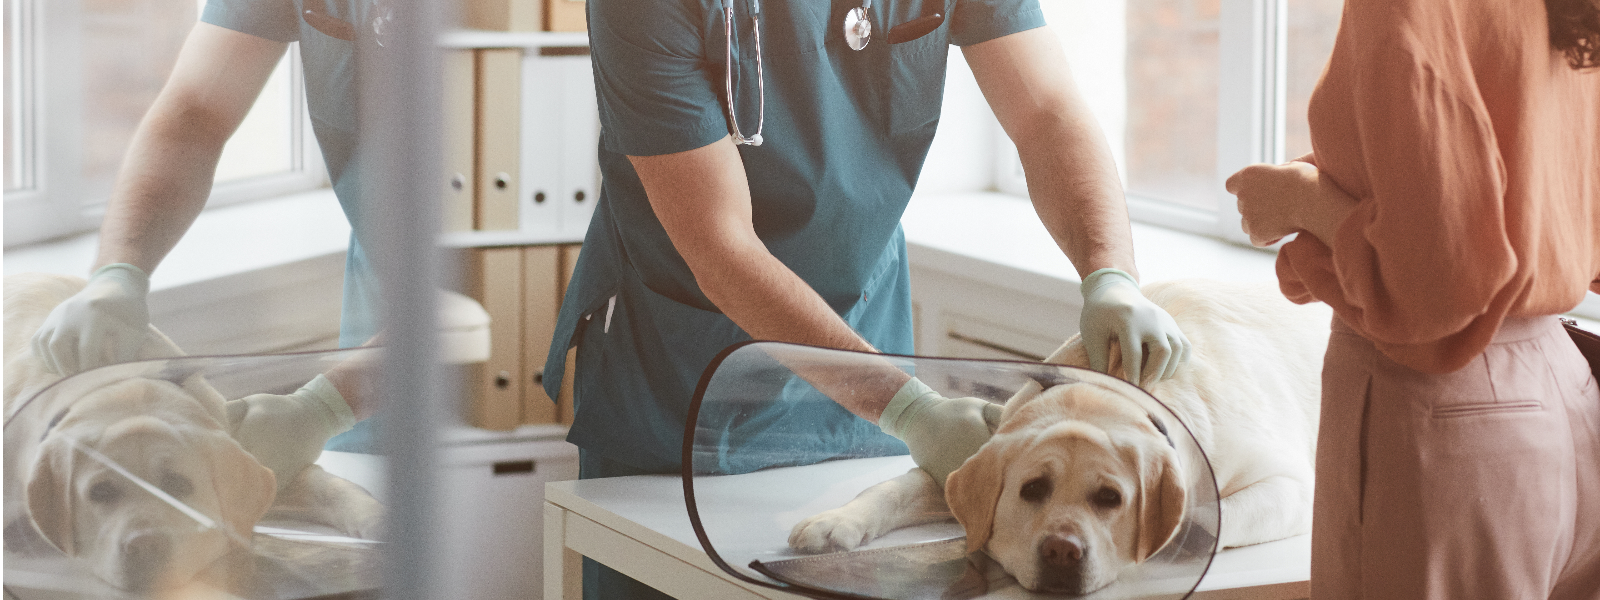 SODALIS OÜ - We provide a full range of veterinary services including disease prevention, surgical care, pet identificati...